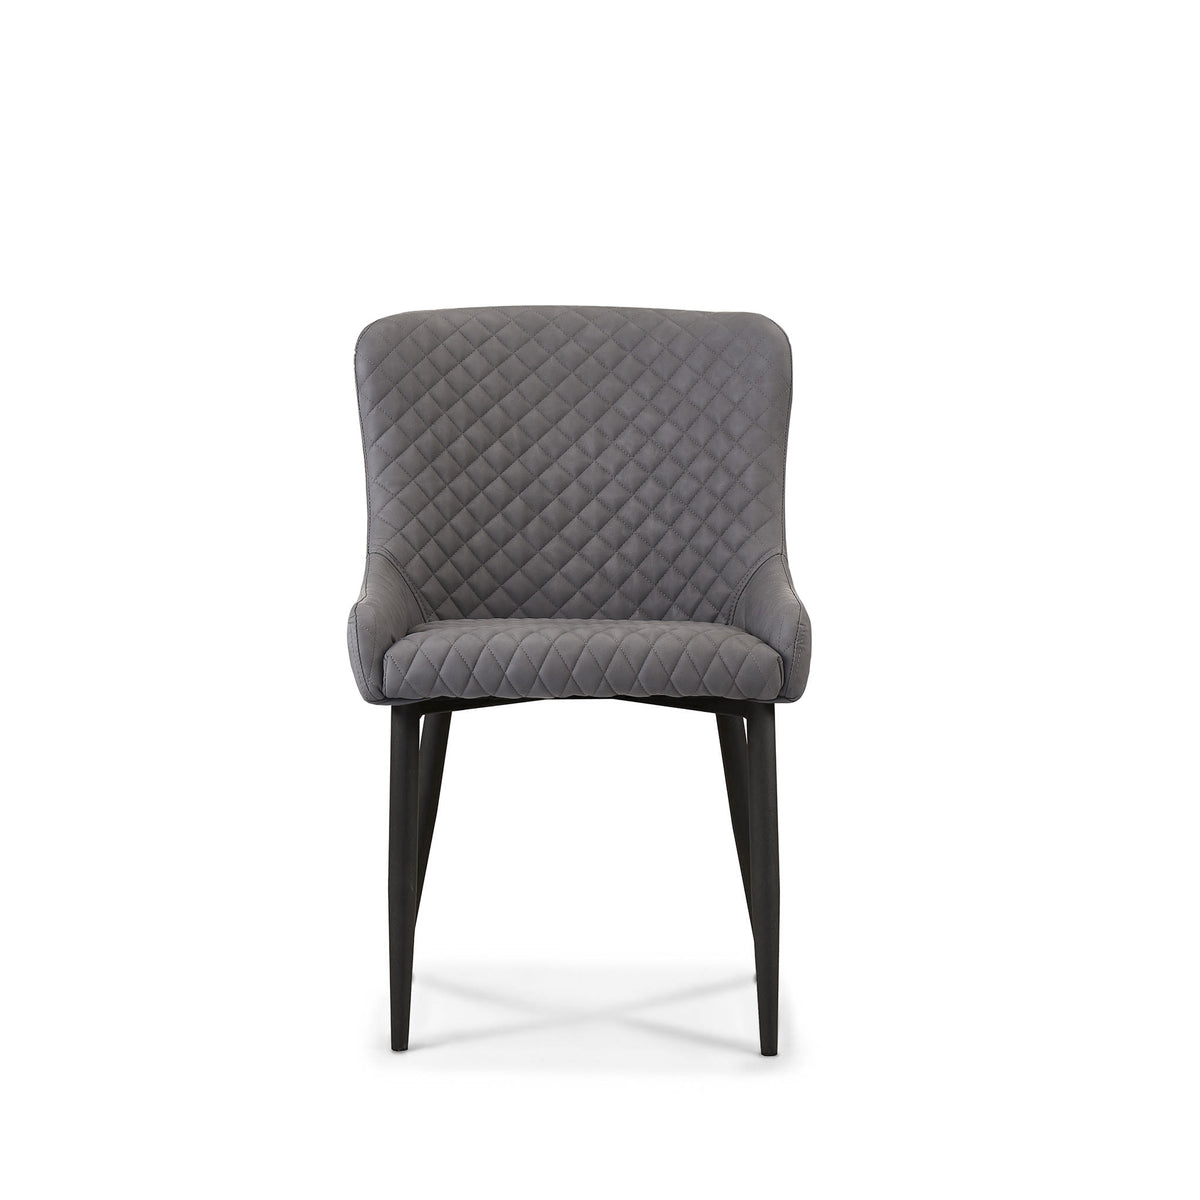 Brooklyn Grey PU Faux Leather Dining Chair from Roseland Furniture Store